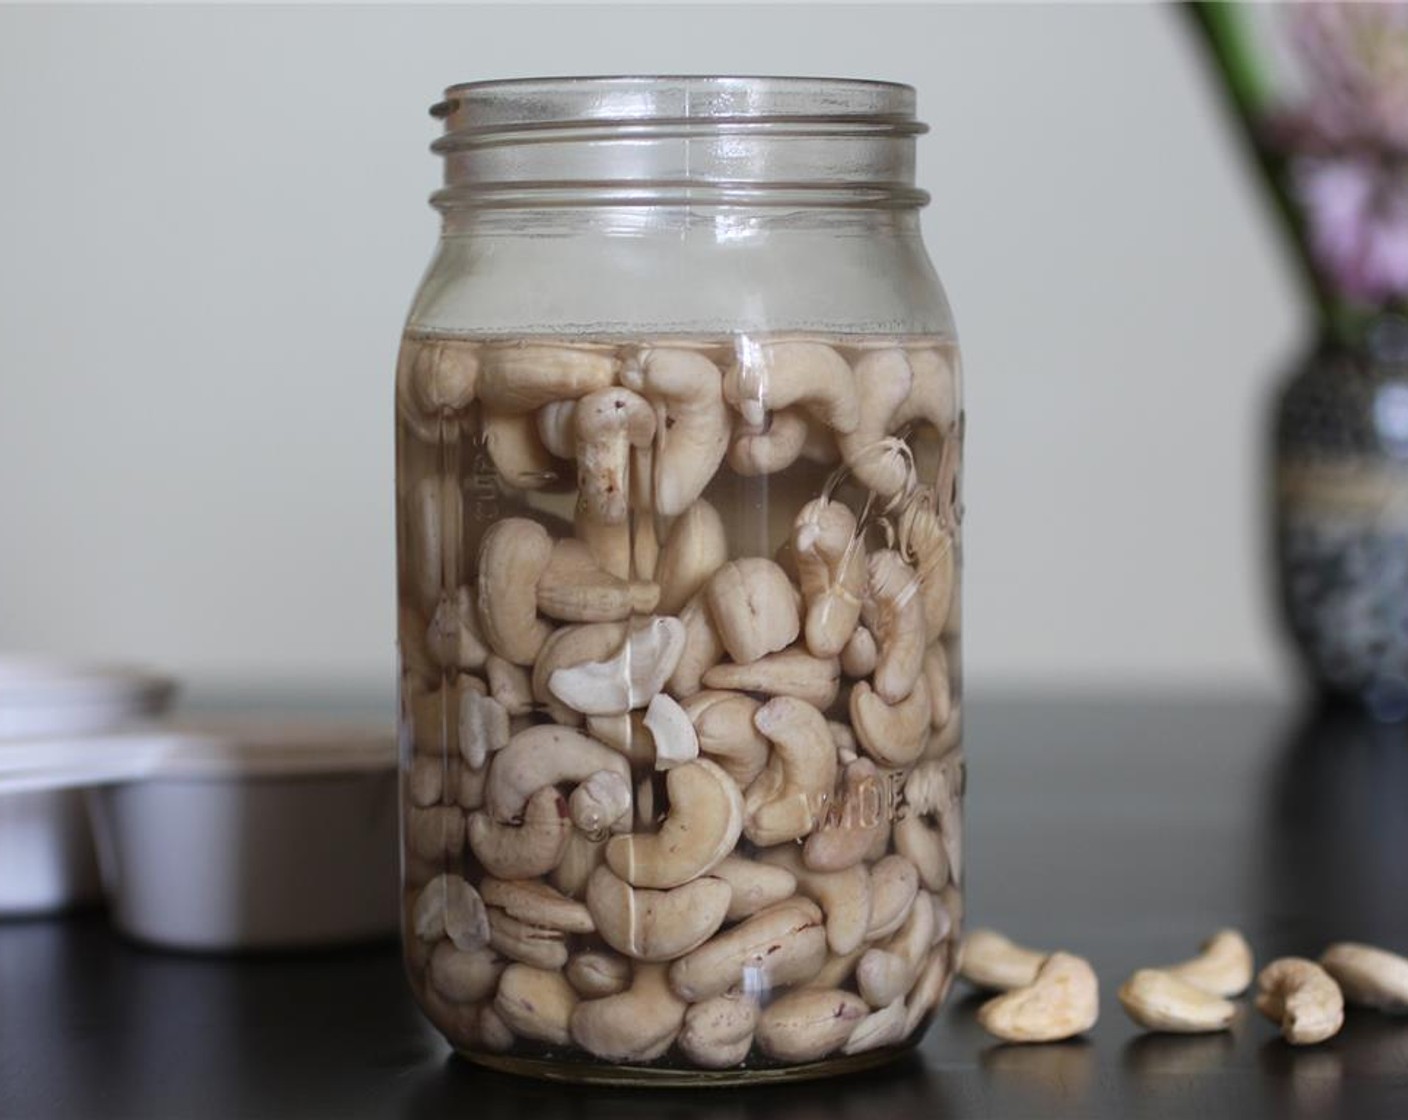 step 1 Start by soaking the Cashew Nuts (1 cup) in water overnight or for a few hours while you do other things. I like to use this time to clean, grocery shop, or walk the dog.